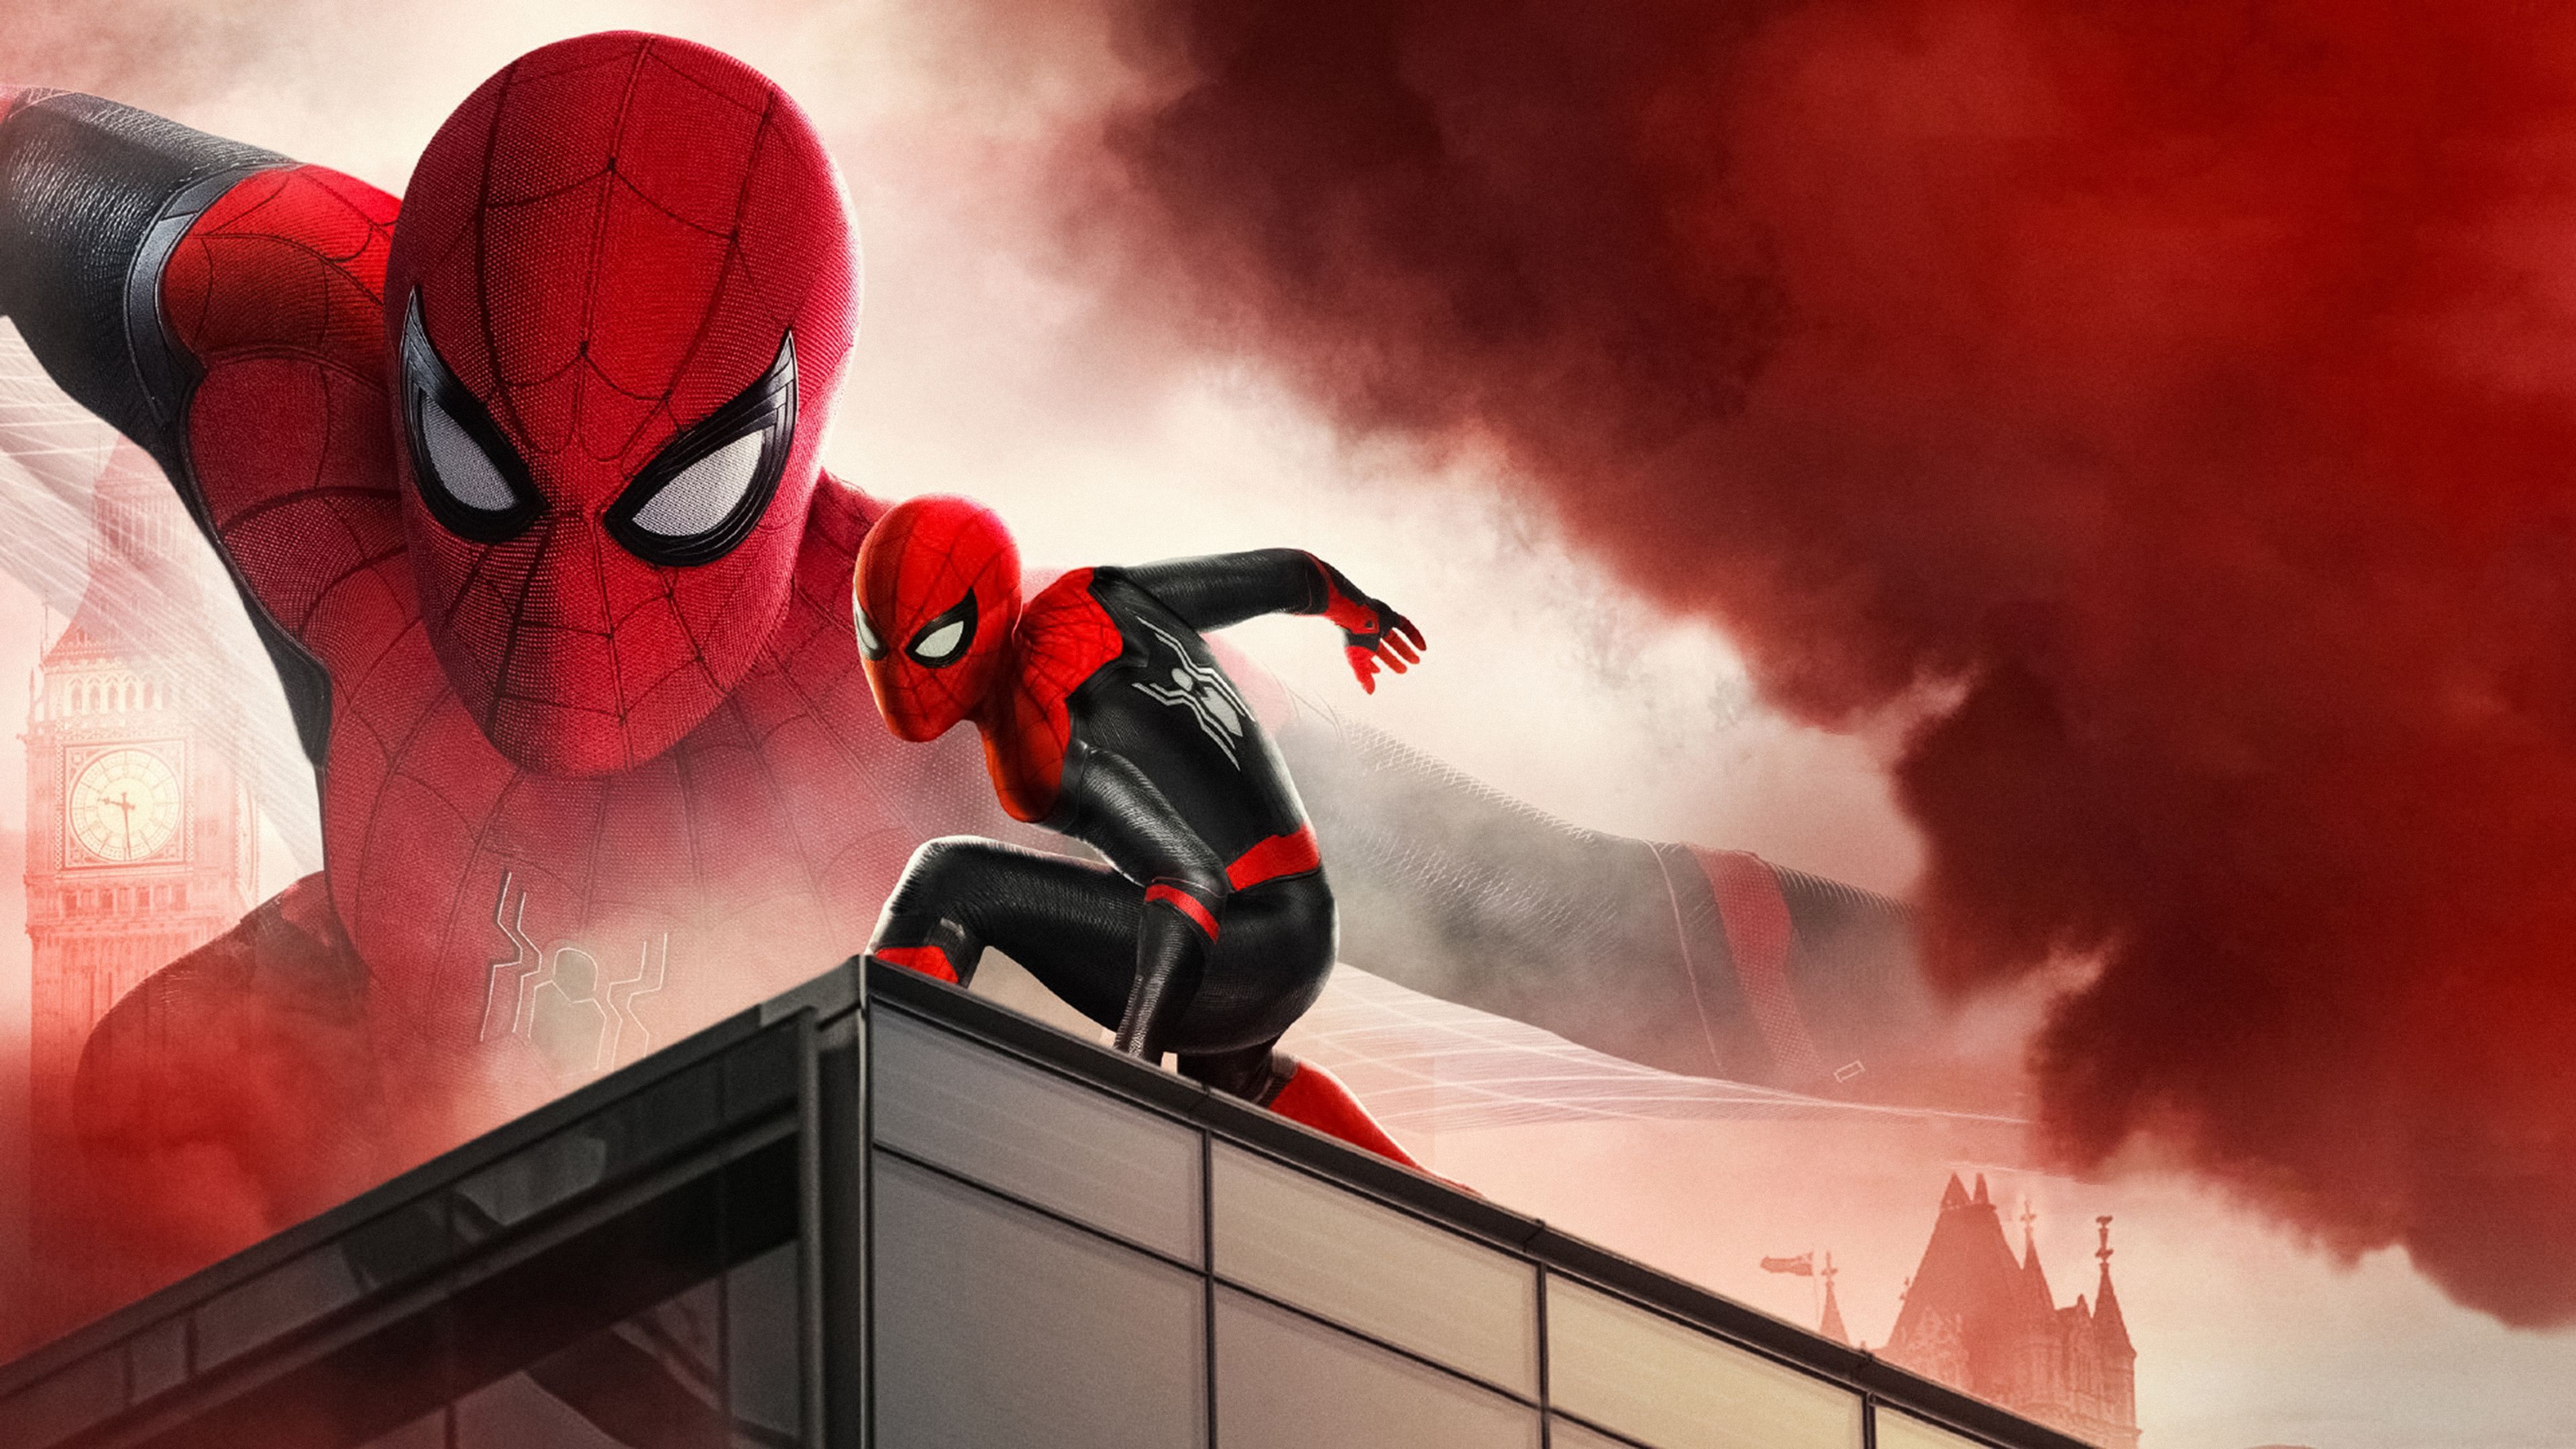 Wallpaper on X: 4k #wallpaper for your #Pc #Cinema #SpiderMan   / X